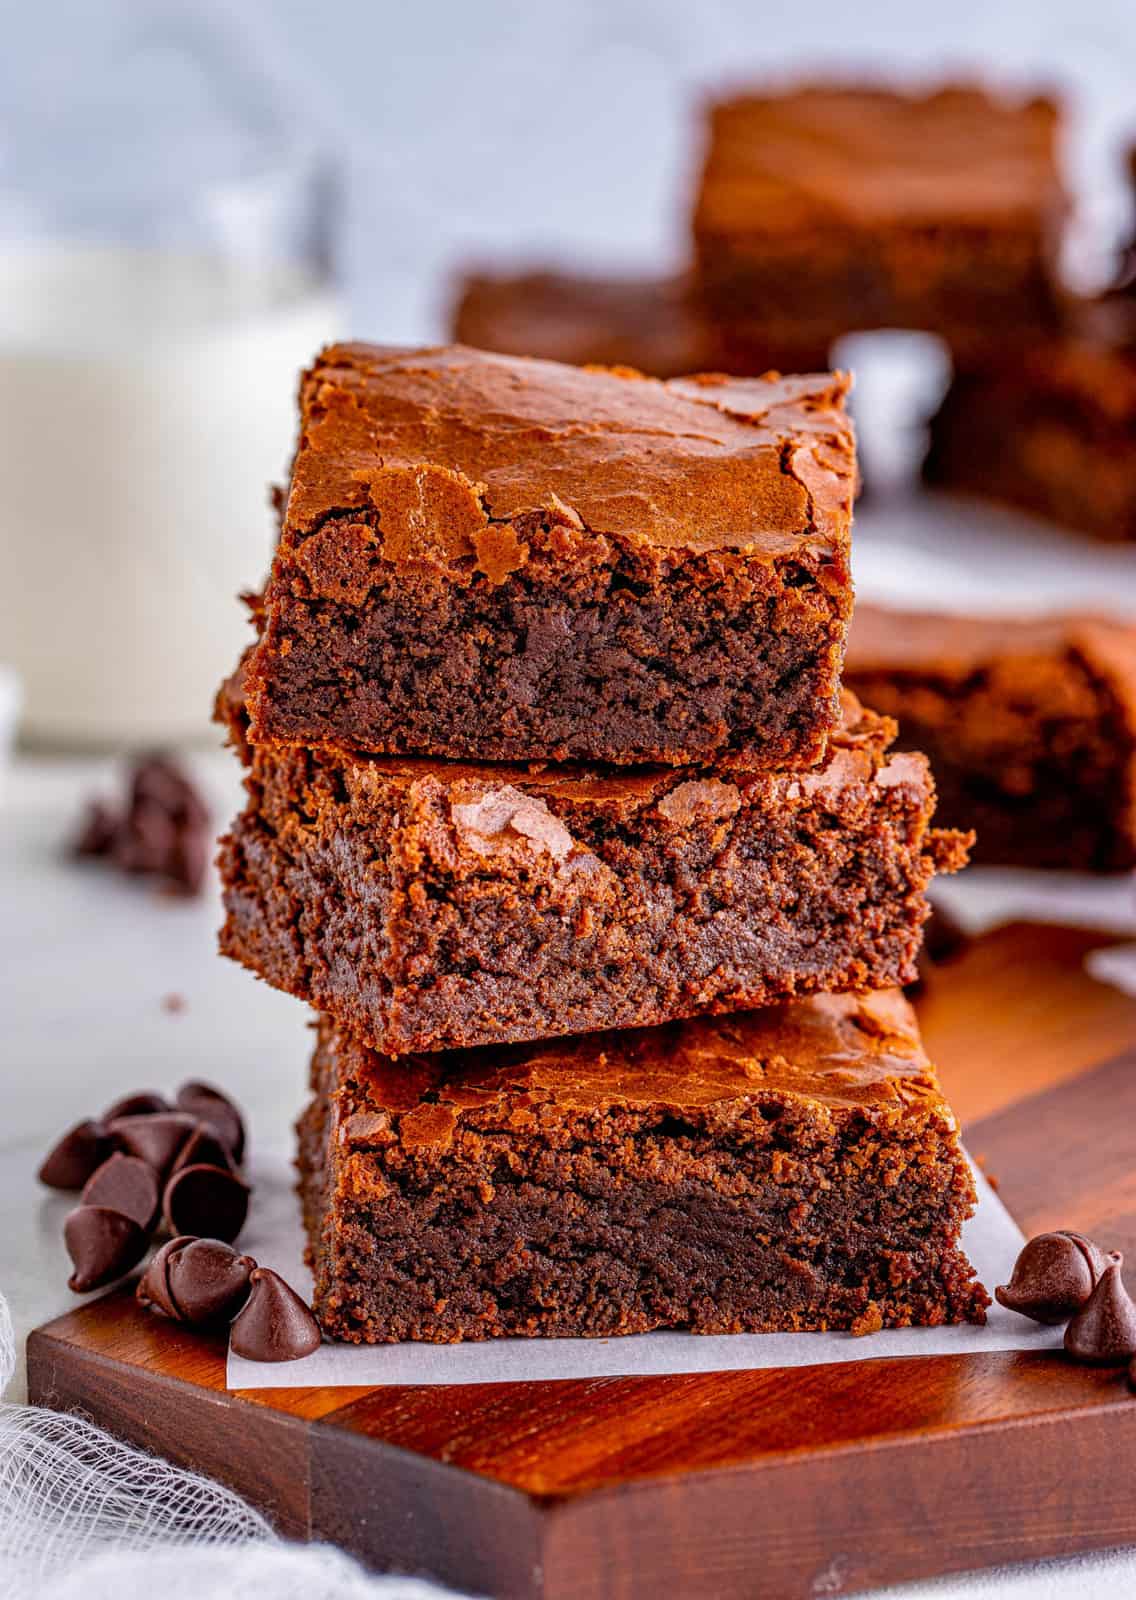 Three stacked Fudge Brownies on parchment paper with chocolate chips by them.